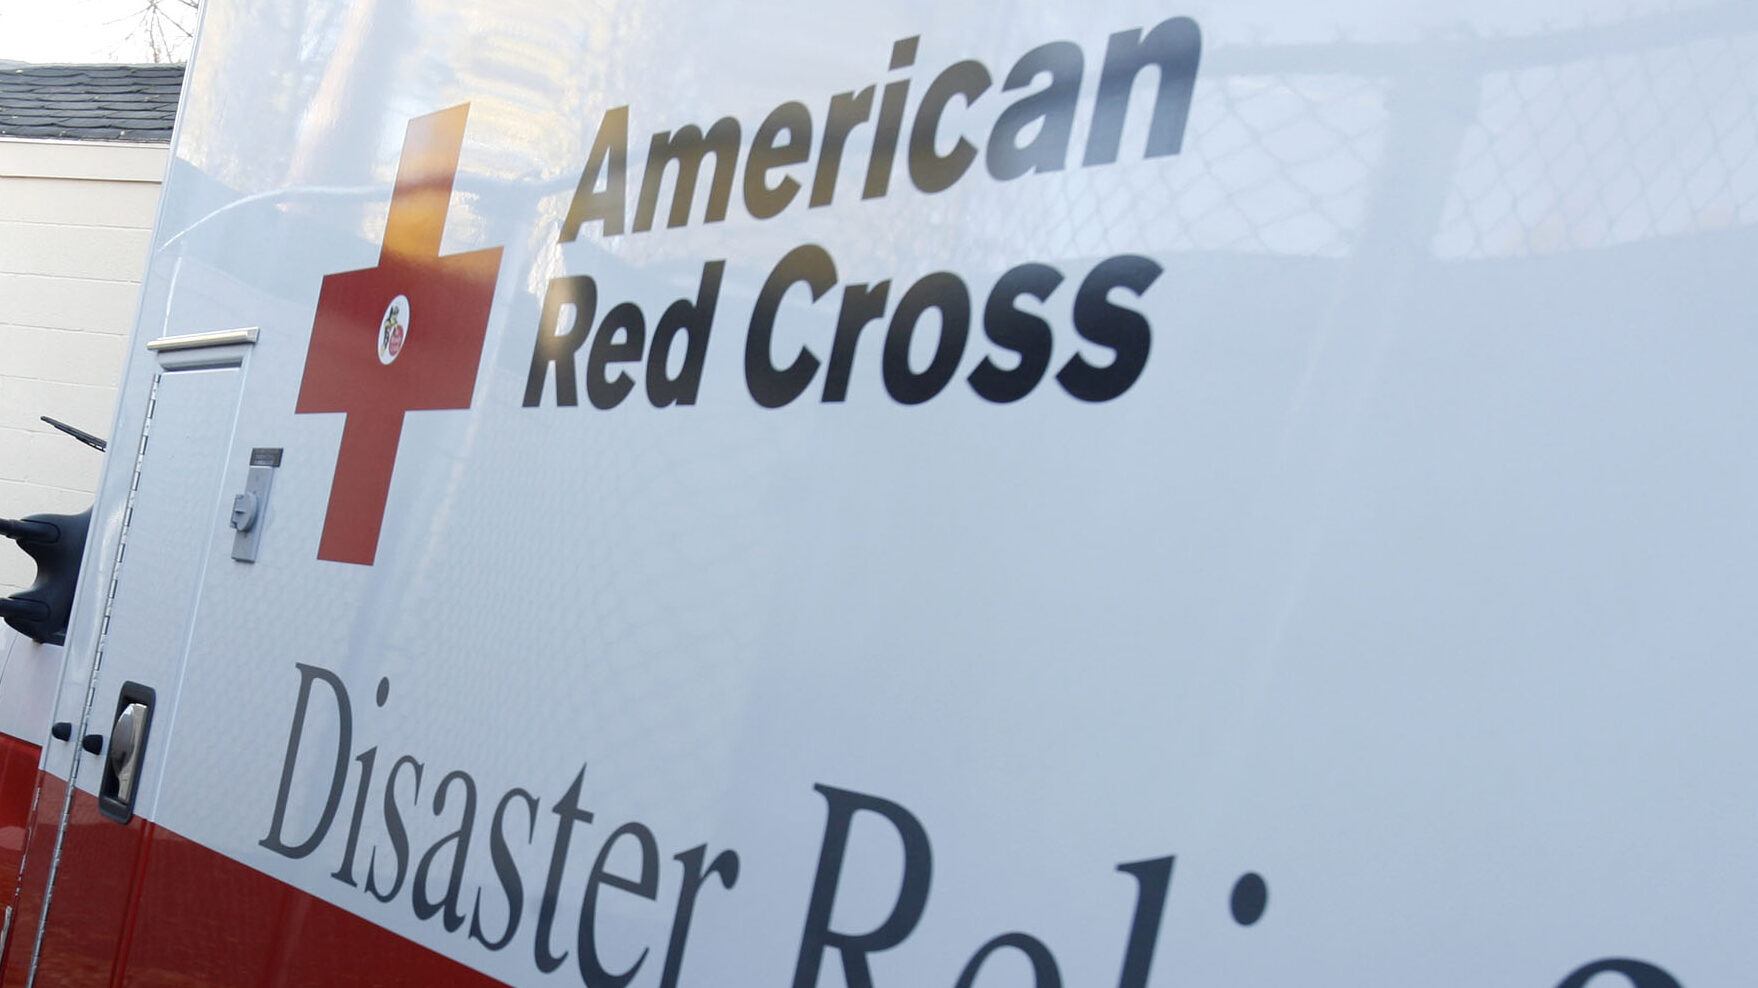 SANDY, Utah -- The Red Cross offered 13 people lodging and financial assistance after their homes w...